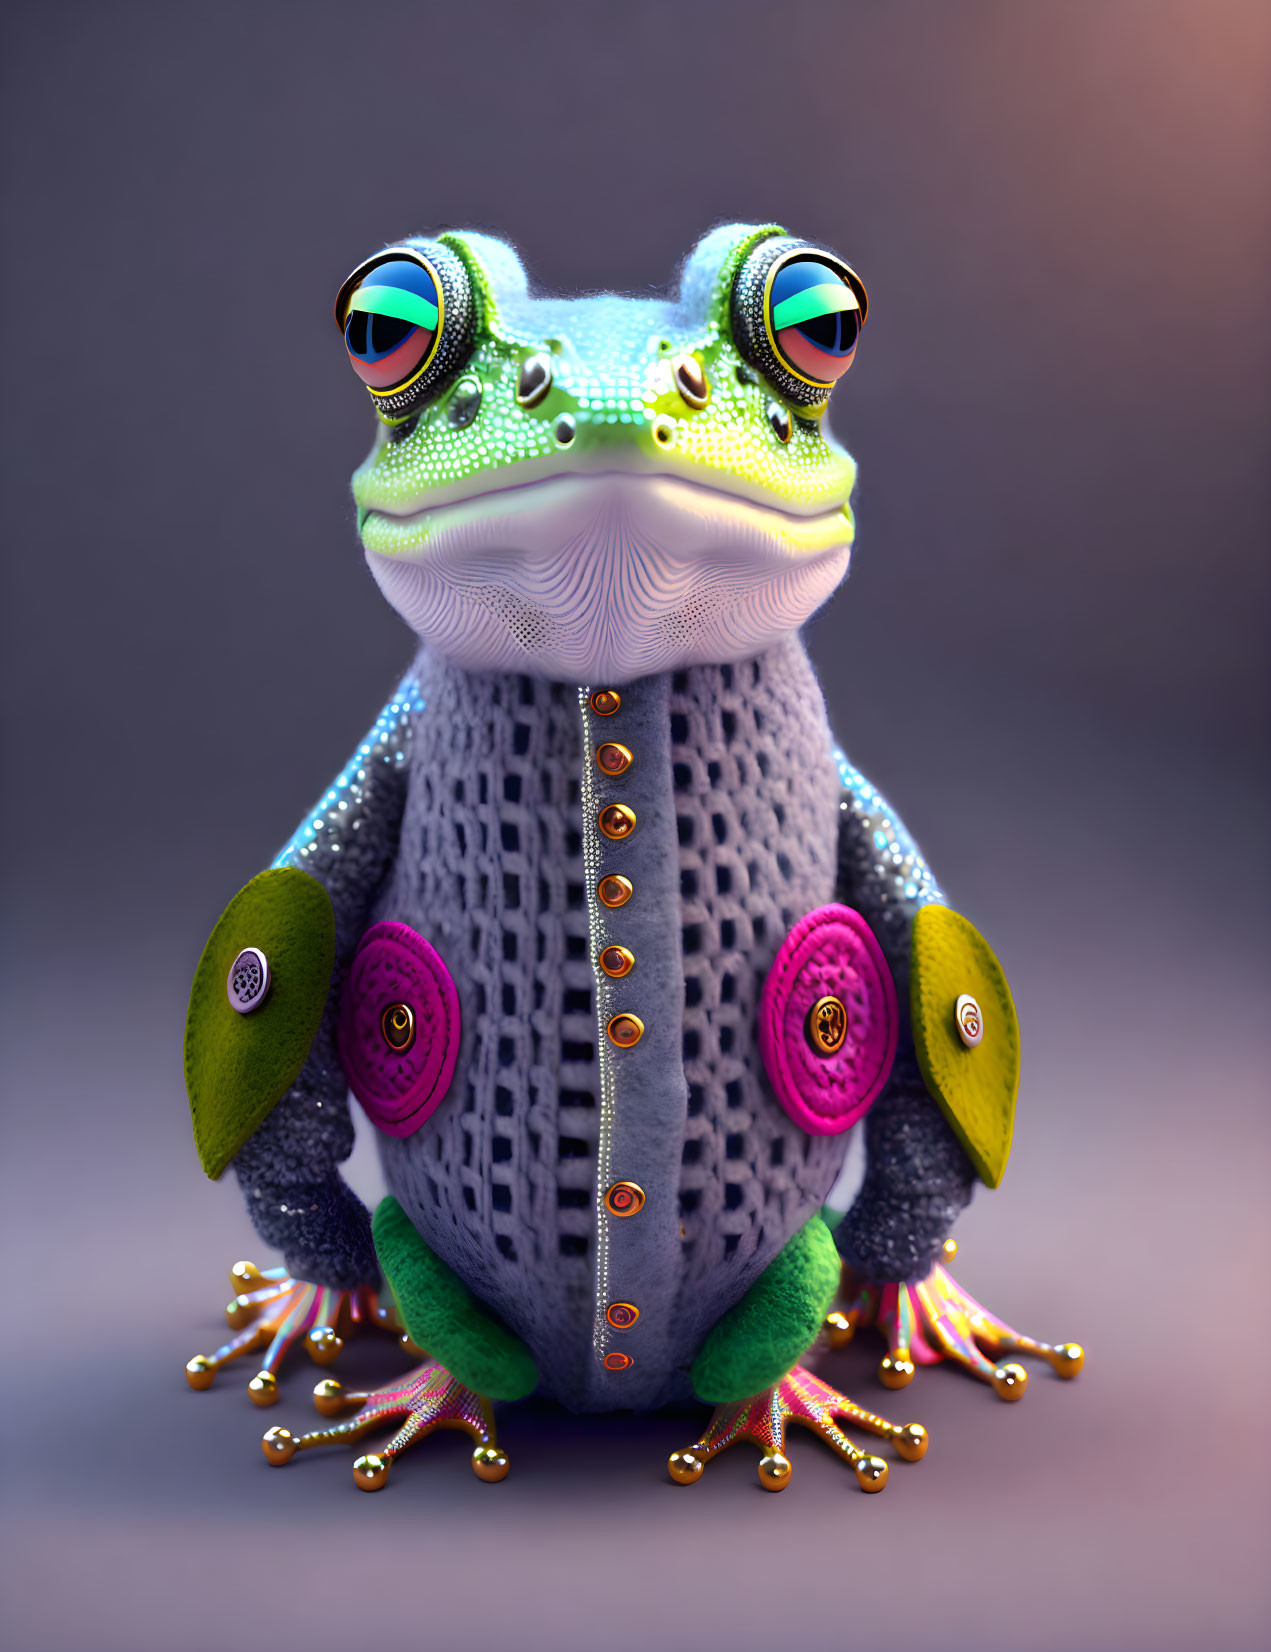 A frog